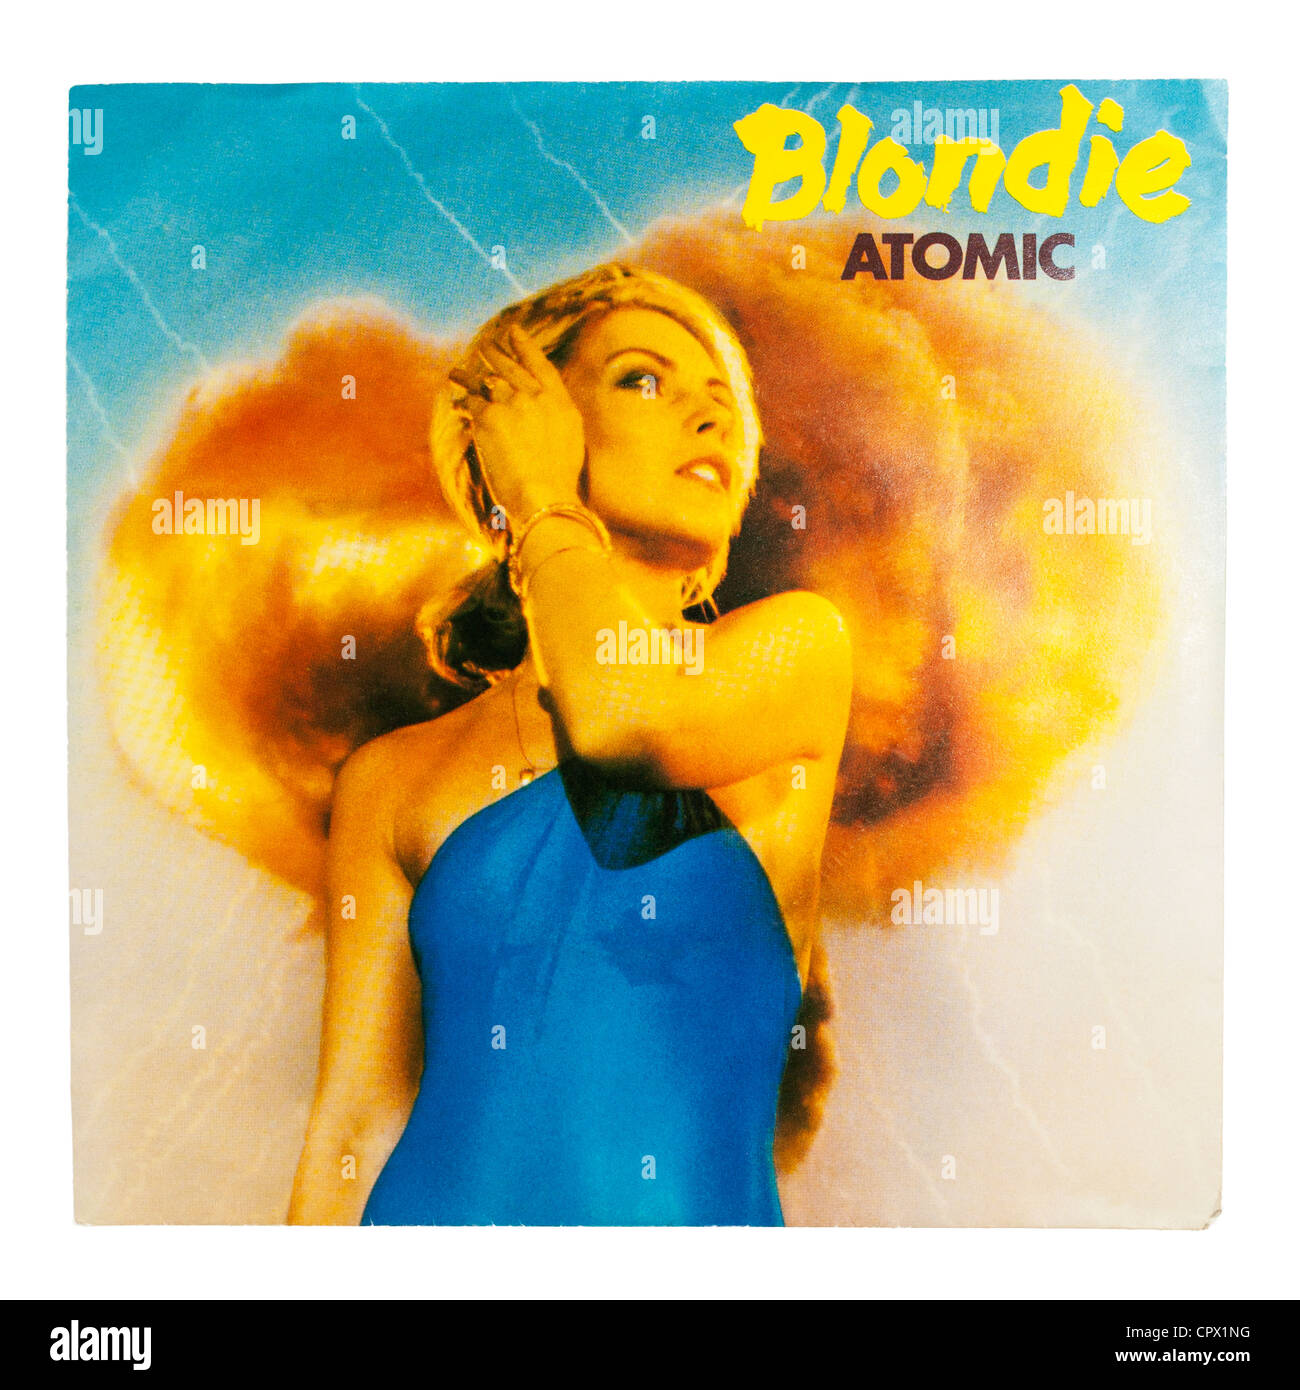 A vinyl single record by Blondie on a white background Stock Photo